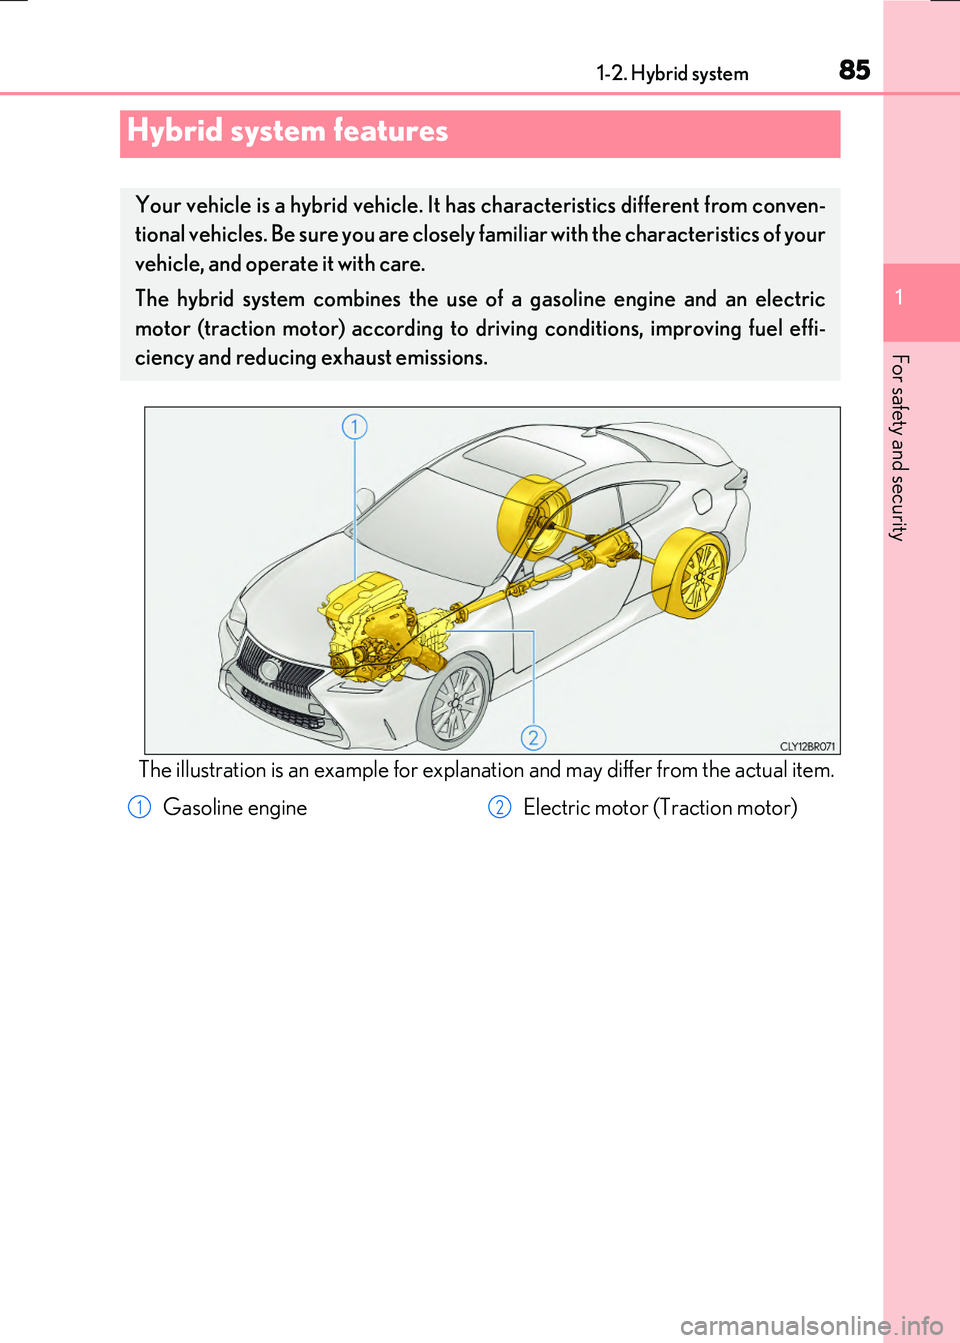 LEXUS RX300H 2017  Owners Manual 85
1
For safety and security
RC300h_EE(OM24740E) 
1-2. Hybrid system
The illustration is an example for explanation and may differ from the actual item.
Hybrid system features
Your vehicle is a hybrid